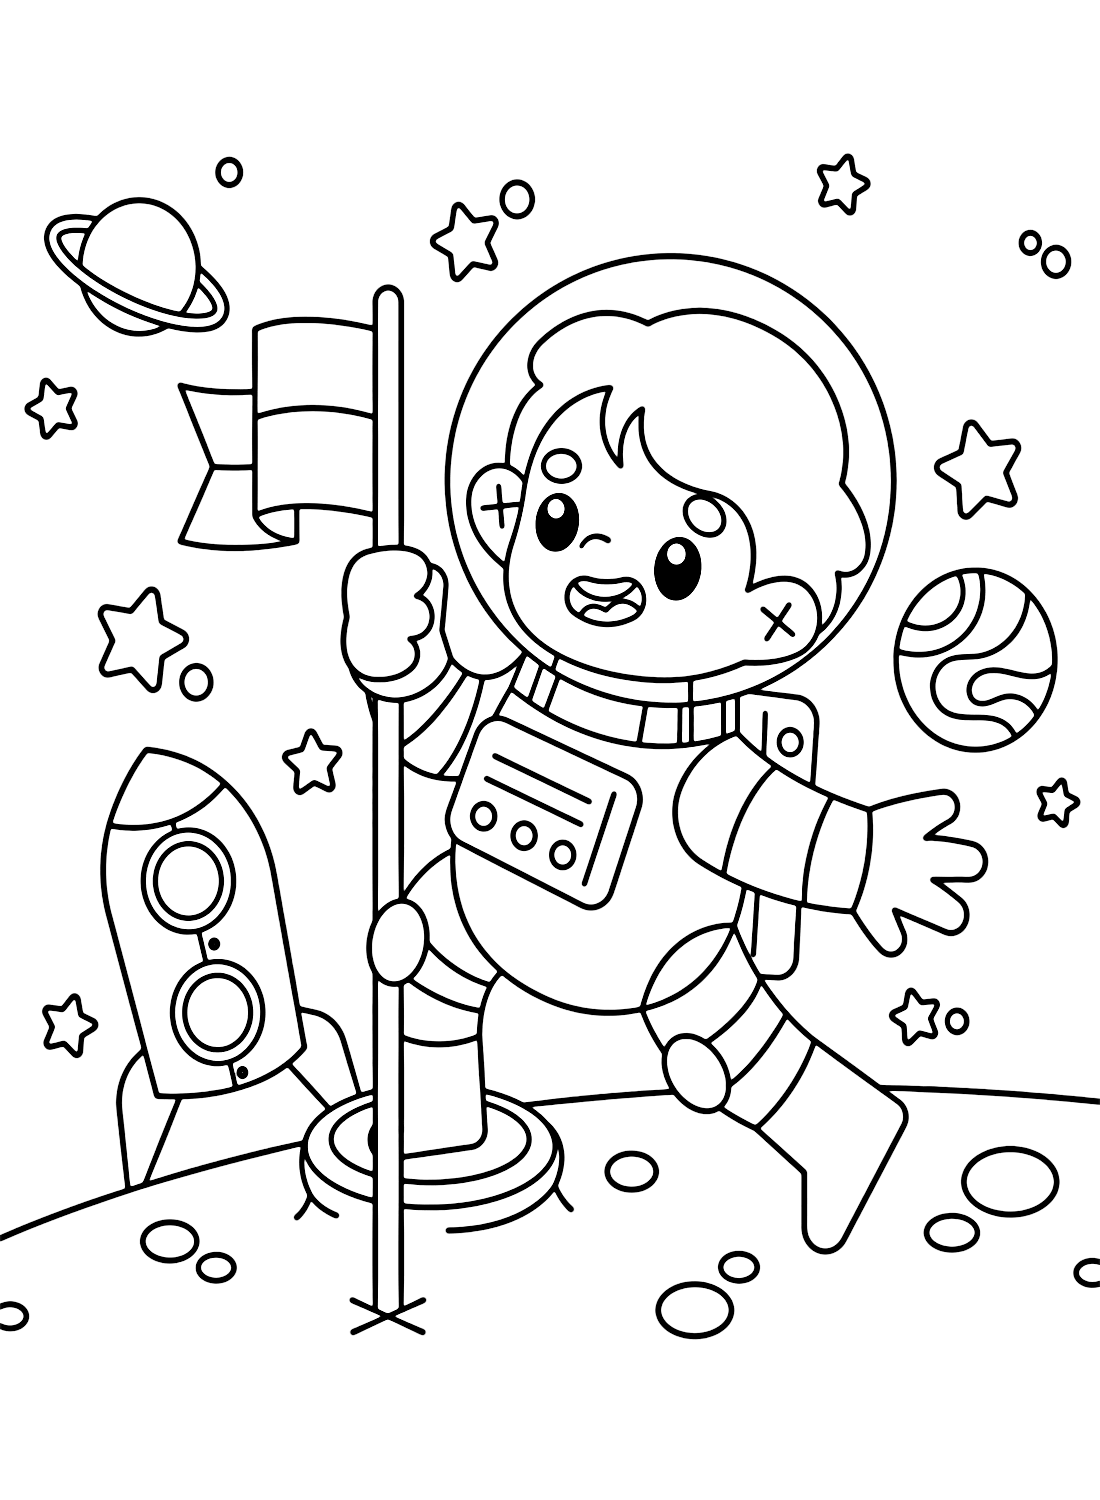 Crayola Coloring Pages for Free from Crayola